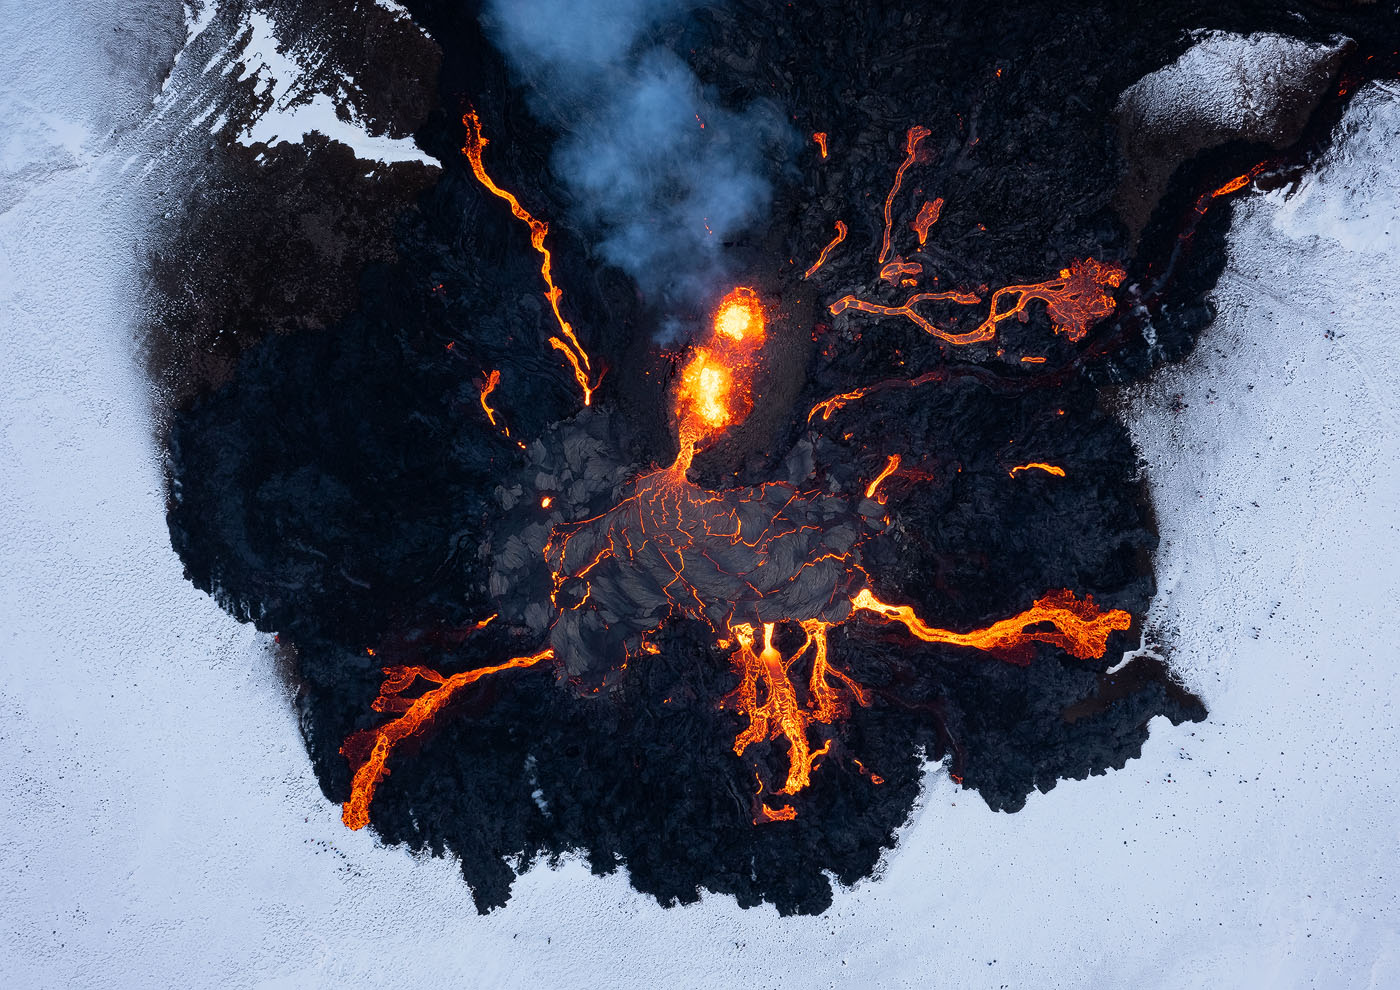 The 2021 Fargradalsfjall eruption in Iceland was a wonderful opportunity to get original compositions. The volcano sprouted new fissures by the day, and together with ever-changing weather conditions, it felt like a different location with each visit. <br>DJI Mavic II Pro, f/7.1, 1/30 sec, ISO 100 <br>Fargradalsfjall, Iceland